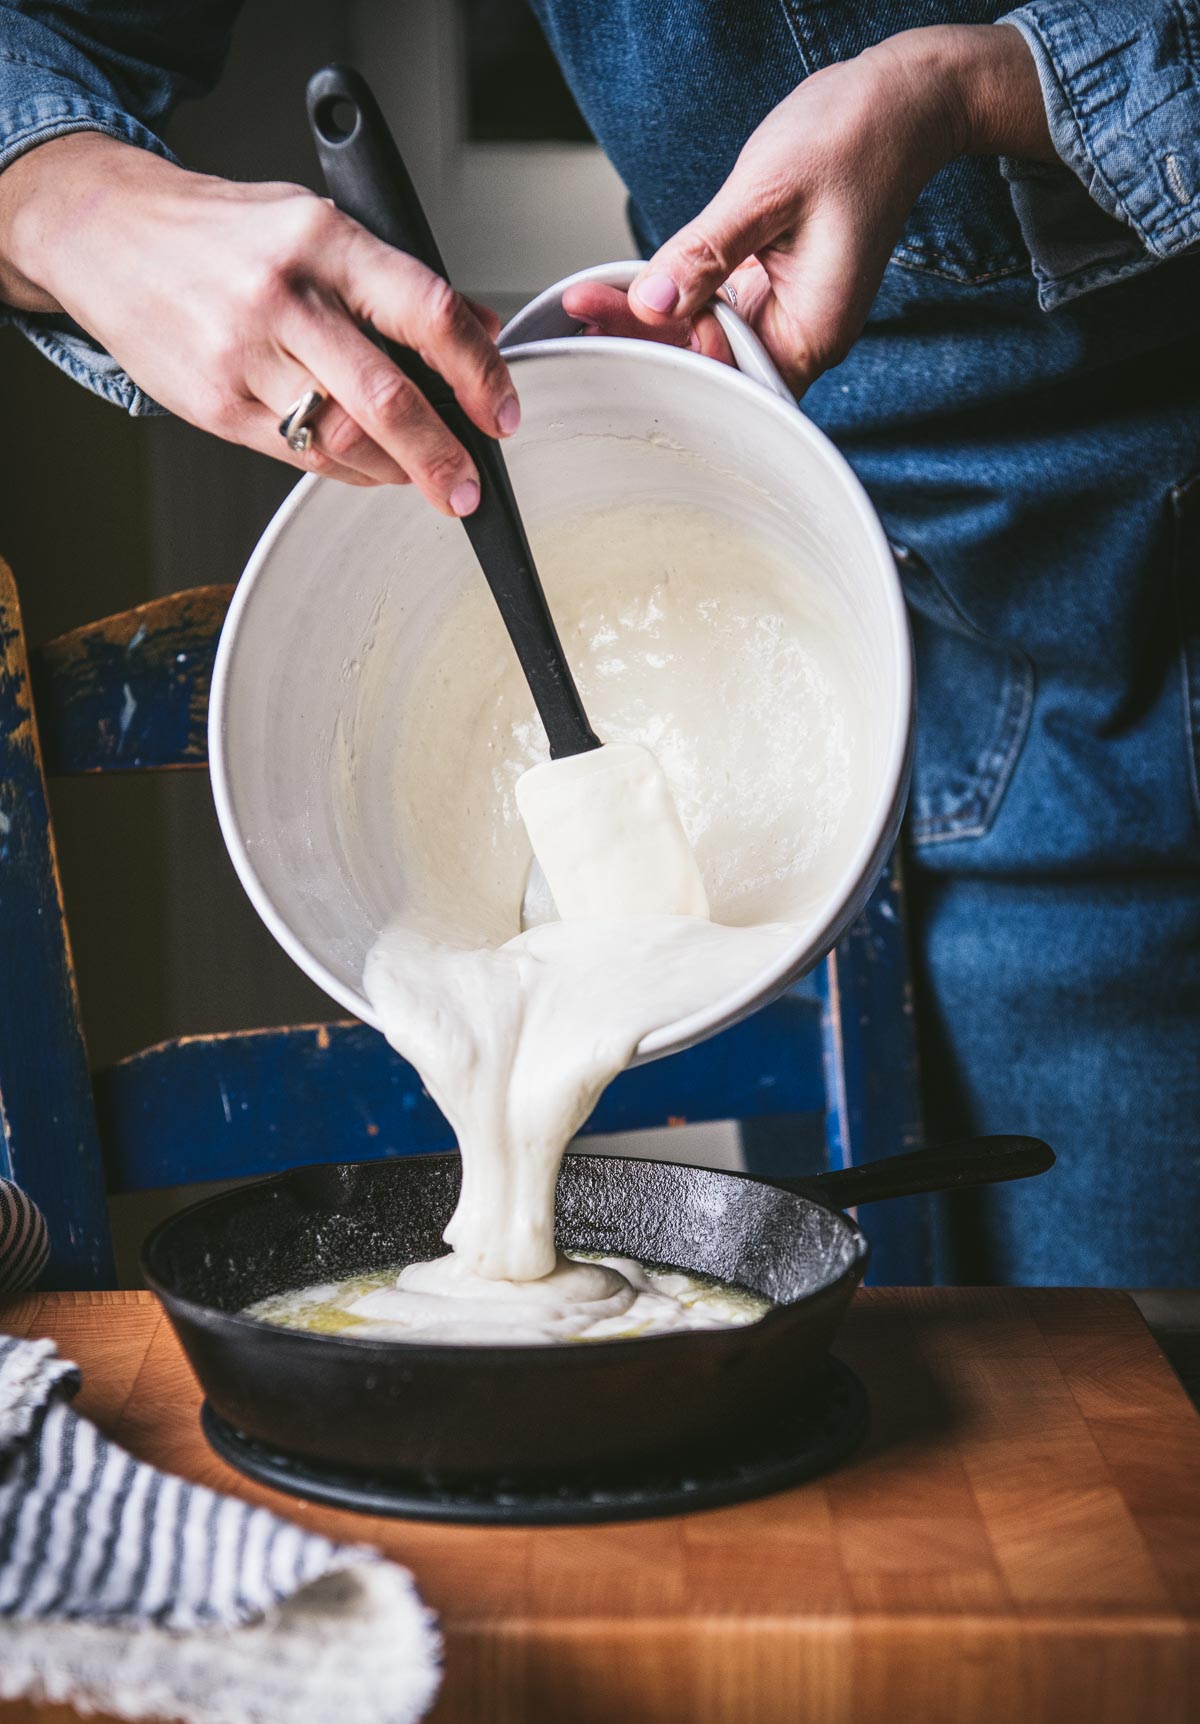 Pouring batter into a cast iron skillet.